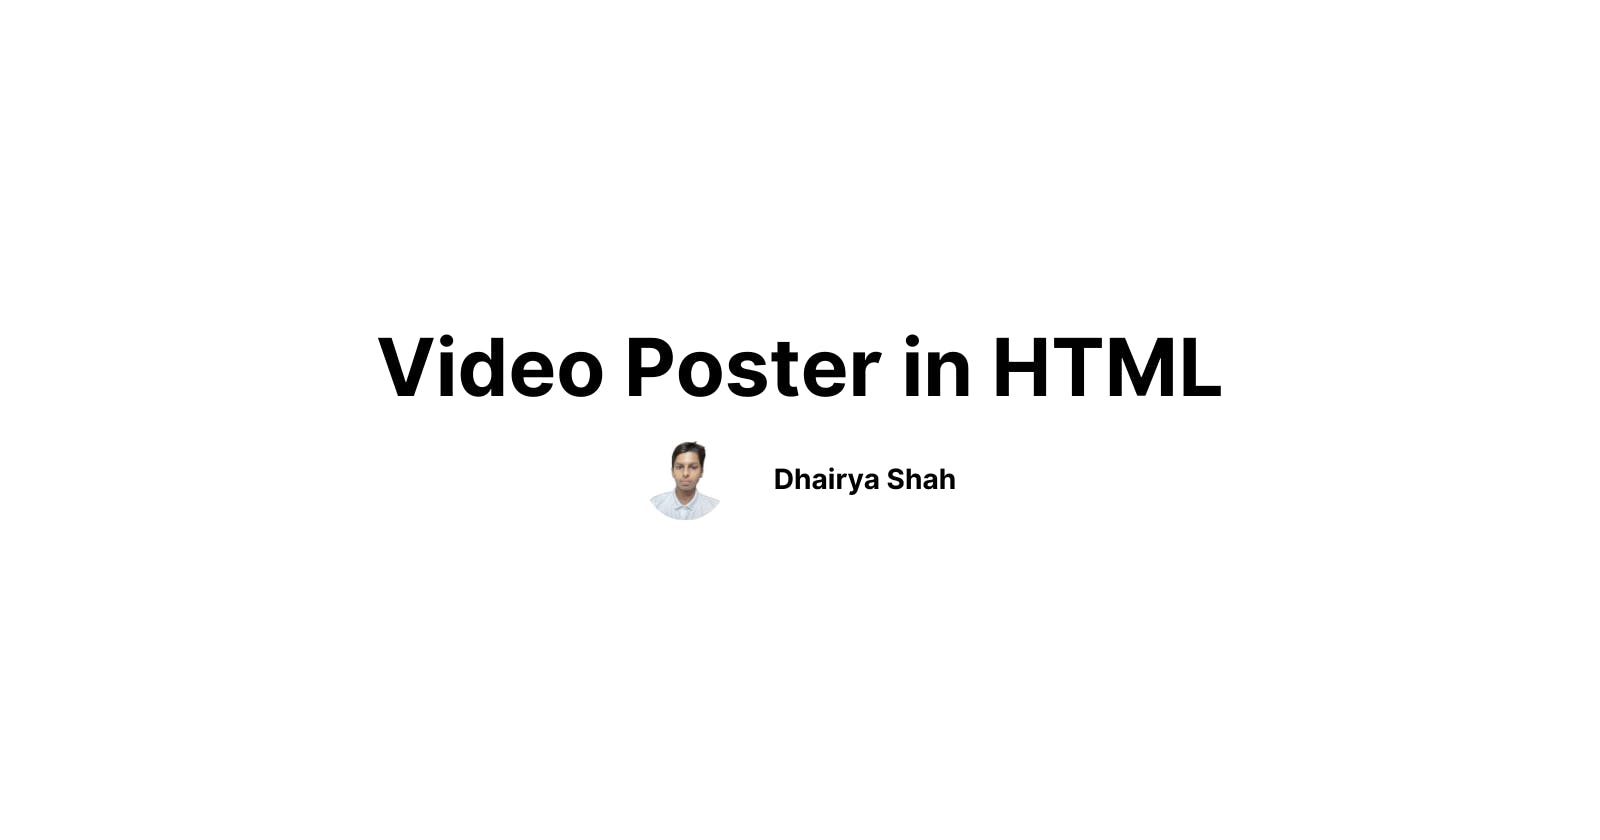 Video Poster (thumbnail) in HTML